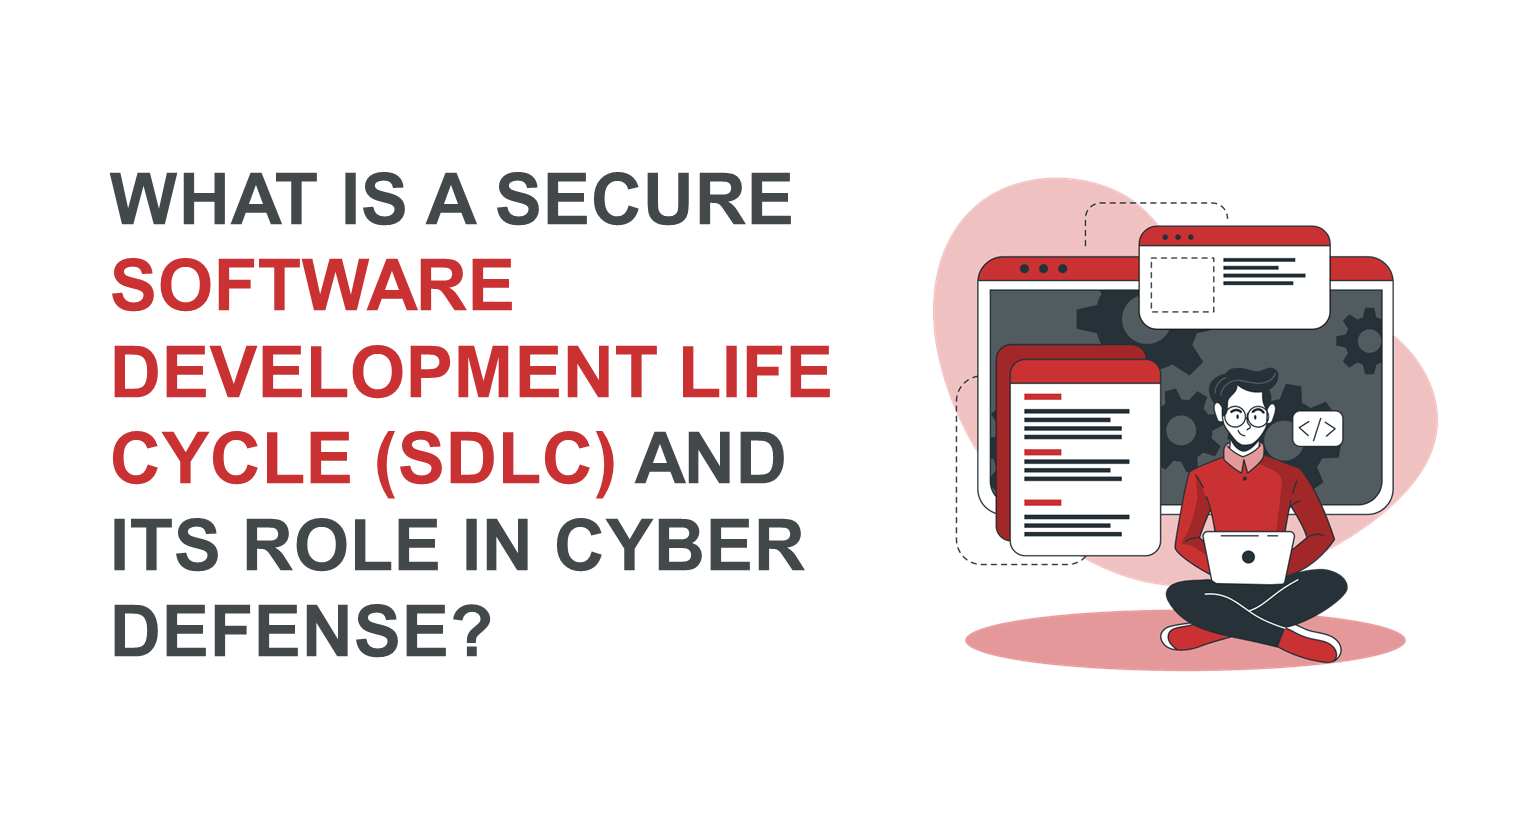 What is a Secure Software Development Life Cycle (SDLC) and Its Role in Cyber Defense? 